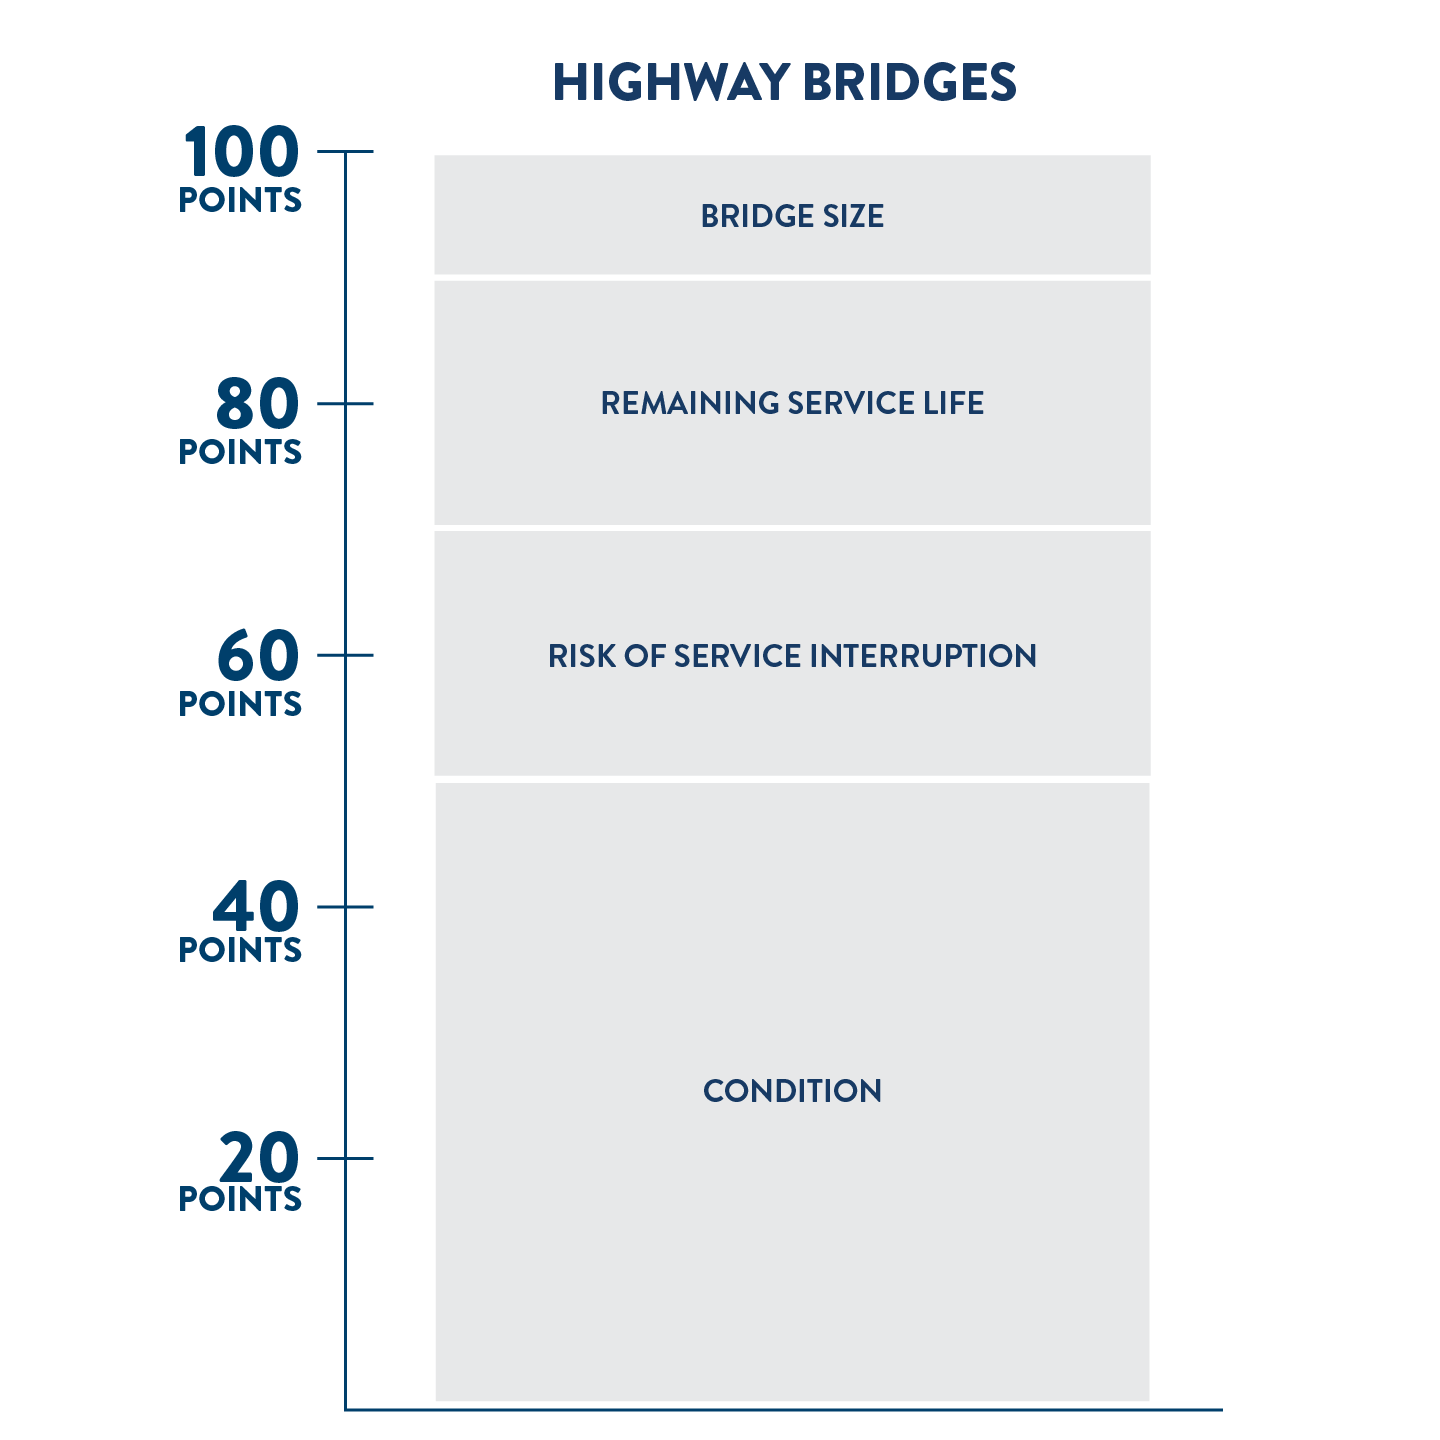 Scoring criteria for non-national highway system bridge projects. Out of 100 possible points, 50 points are based on the condition of the bridge, 20 points are based on the risk of service interruption, 20 points are based on the remaining service life of the bridge deck, and 10 points are based on the size of the bridge. 